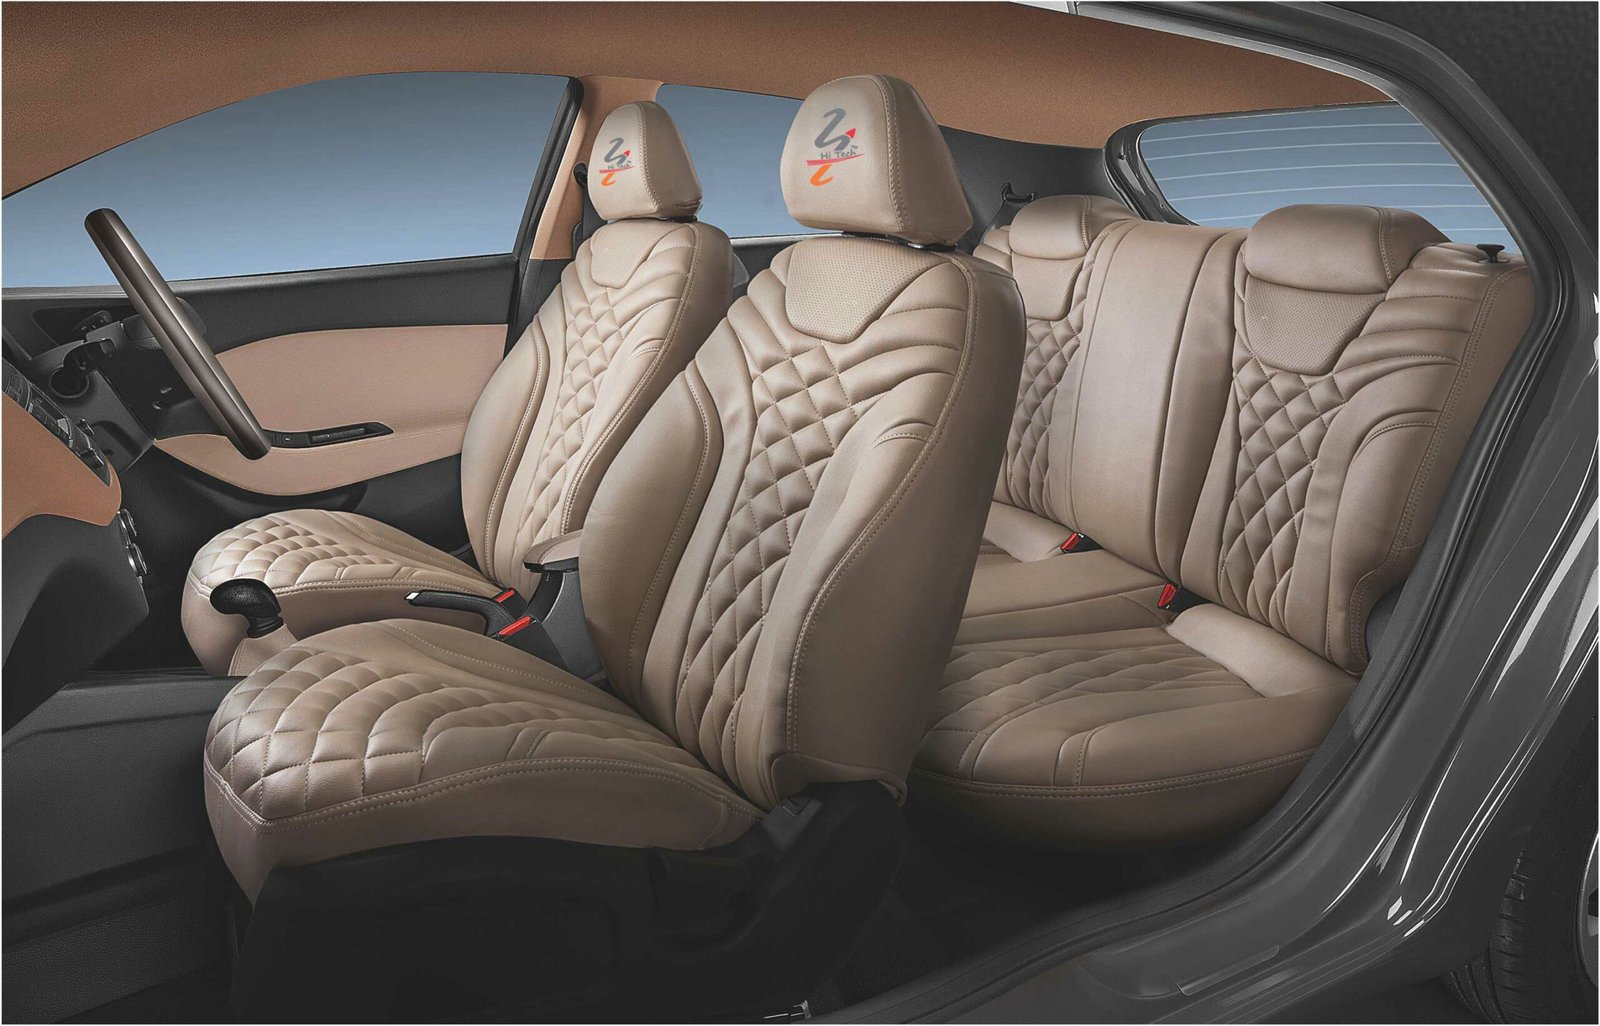 Prism Hitech Car Seat Covers in India